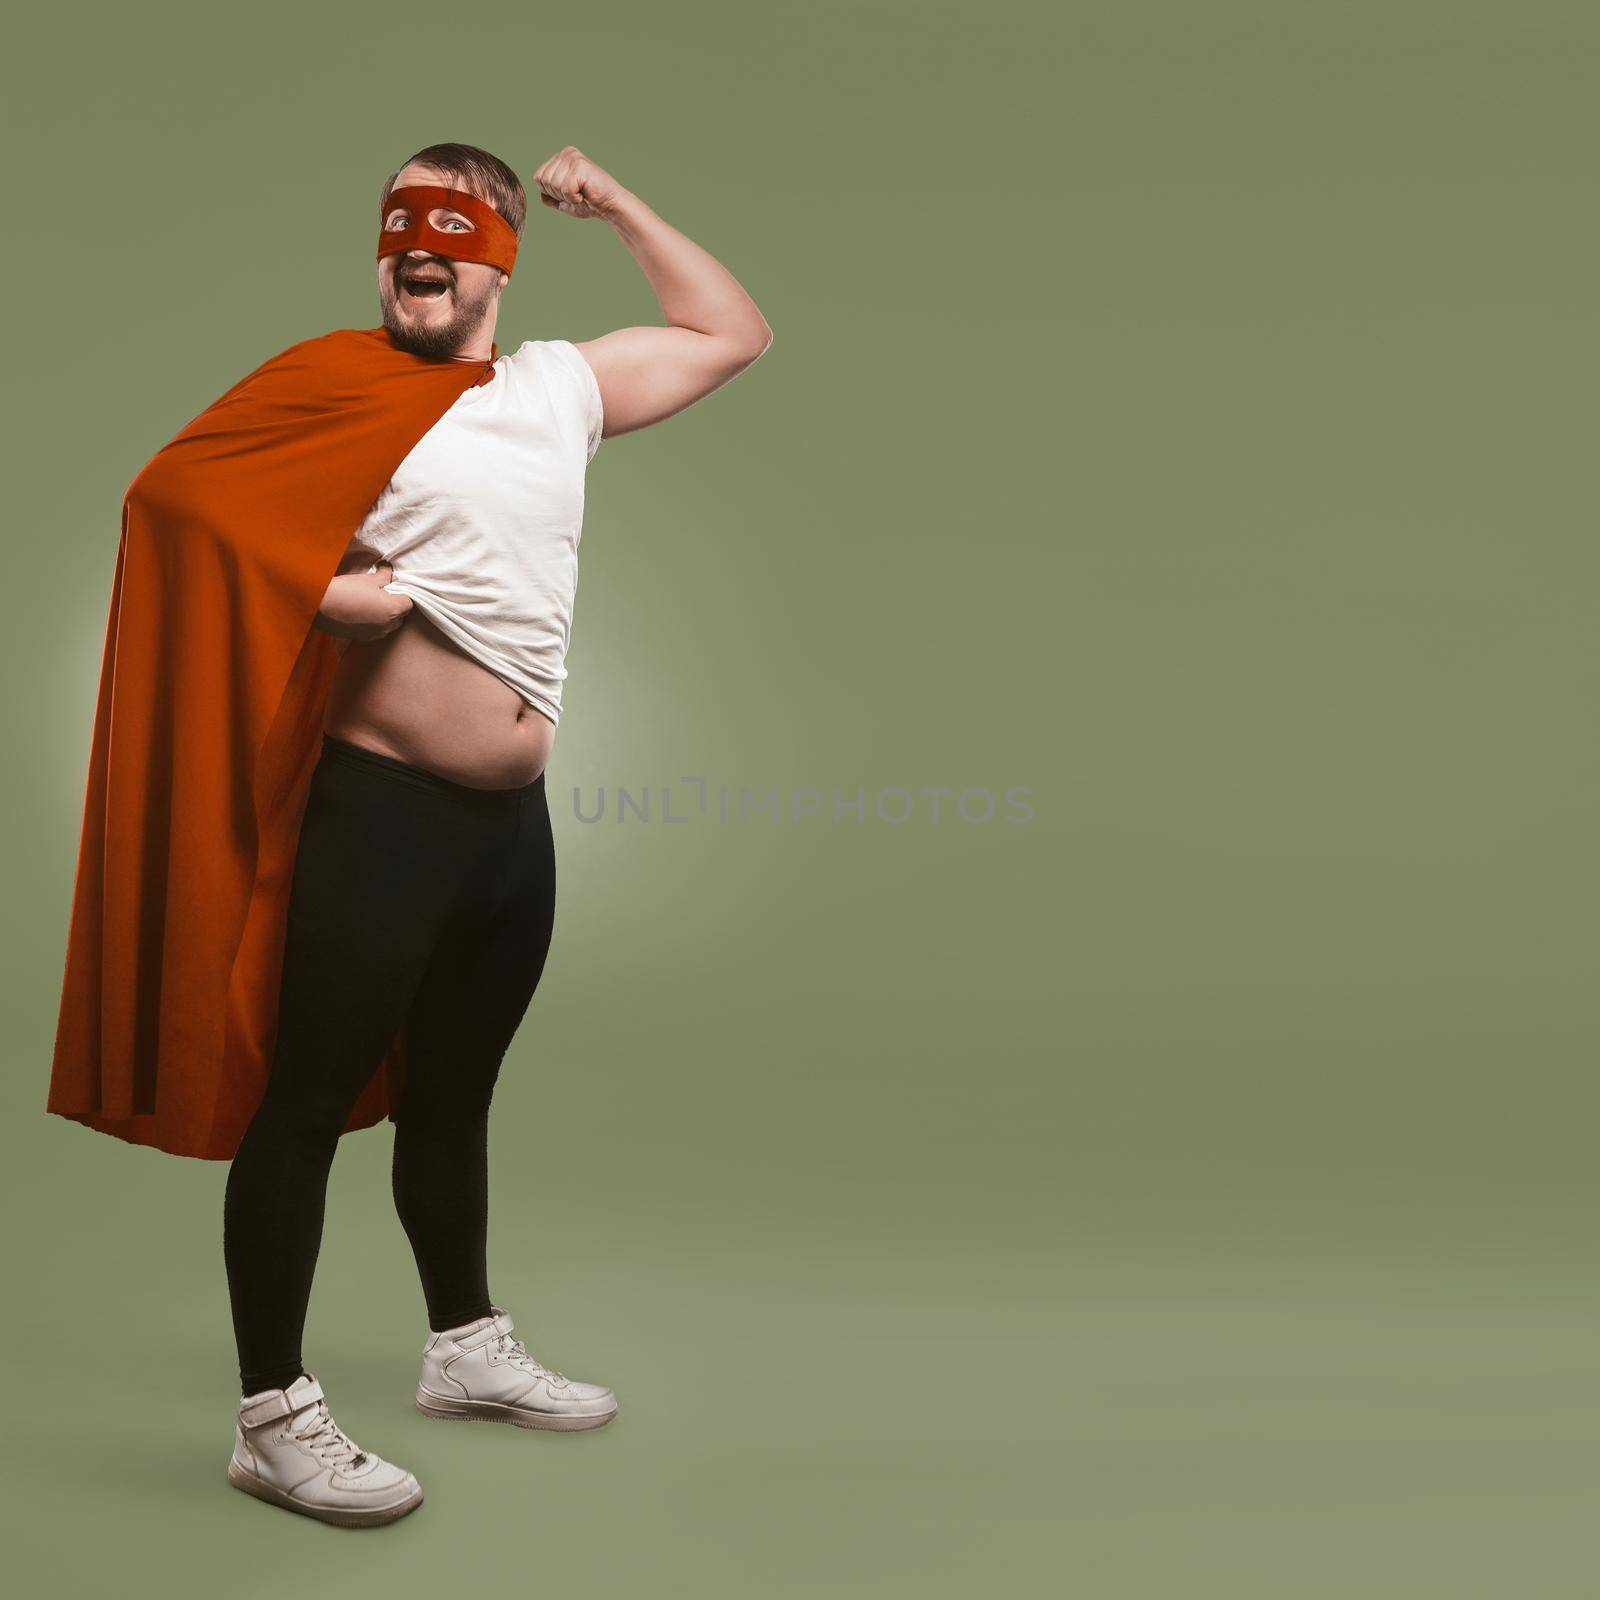 Body positive Super hero man shows his muscles and tummy. Super power and overweight concept. Isolated on green background with text space at right side. Template for social networks by LipikStockMedia